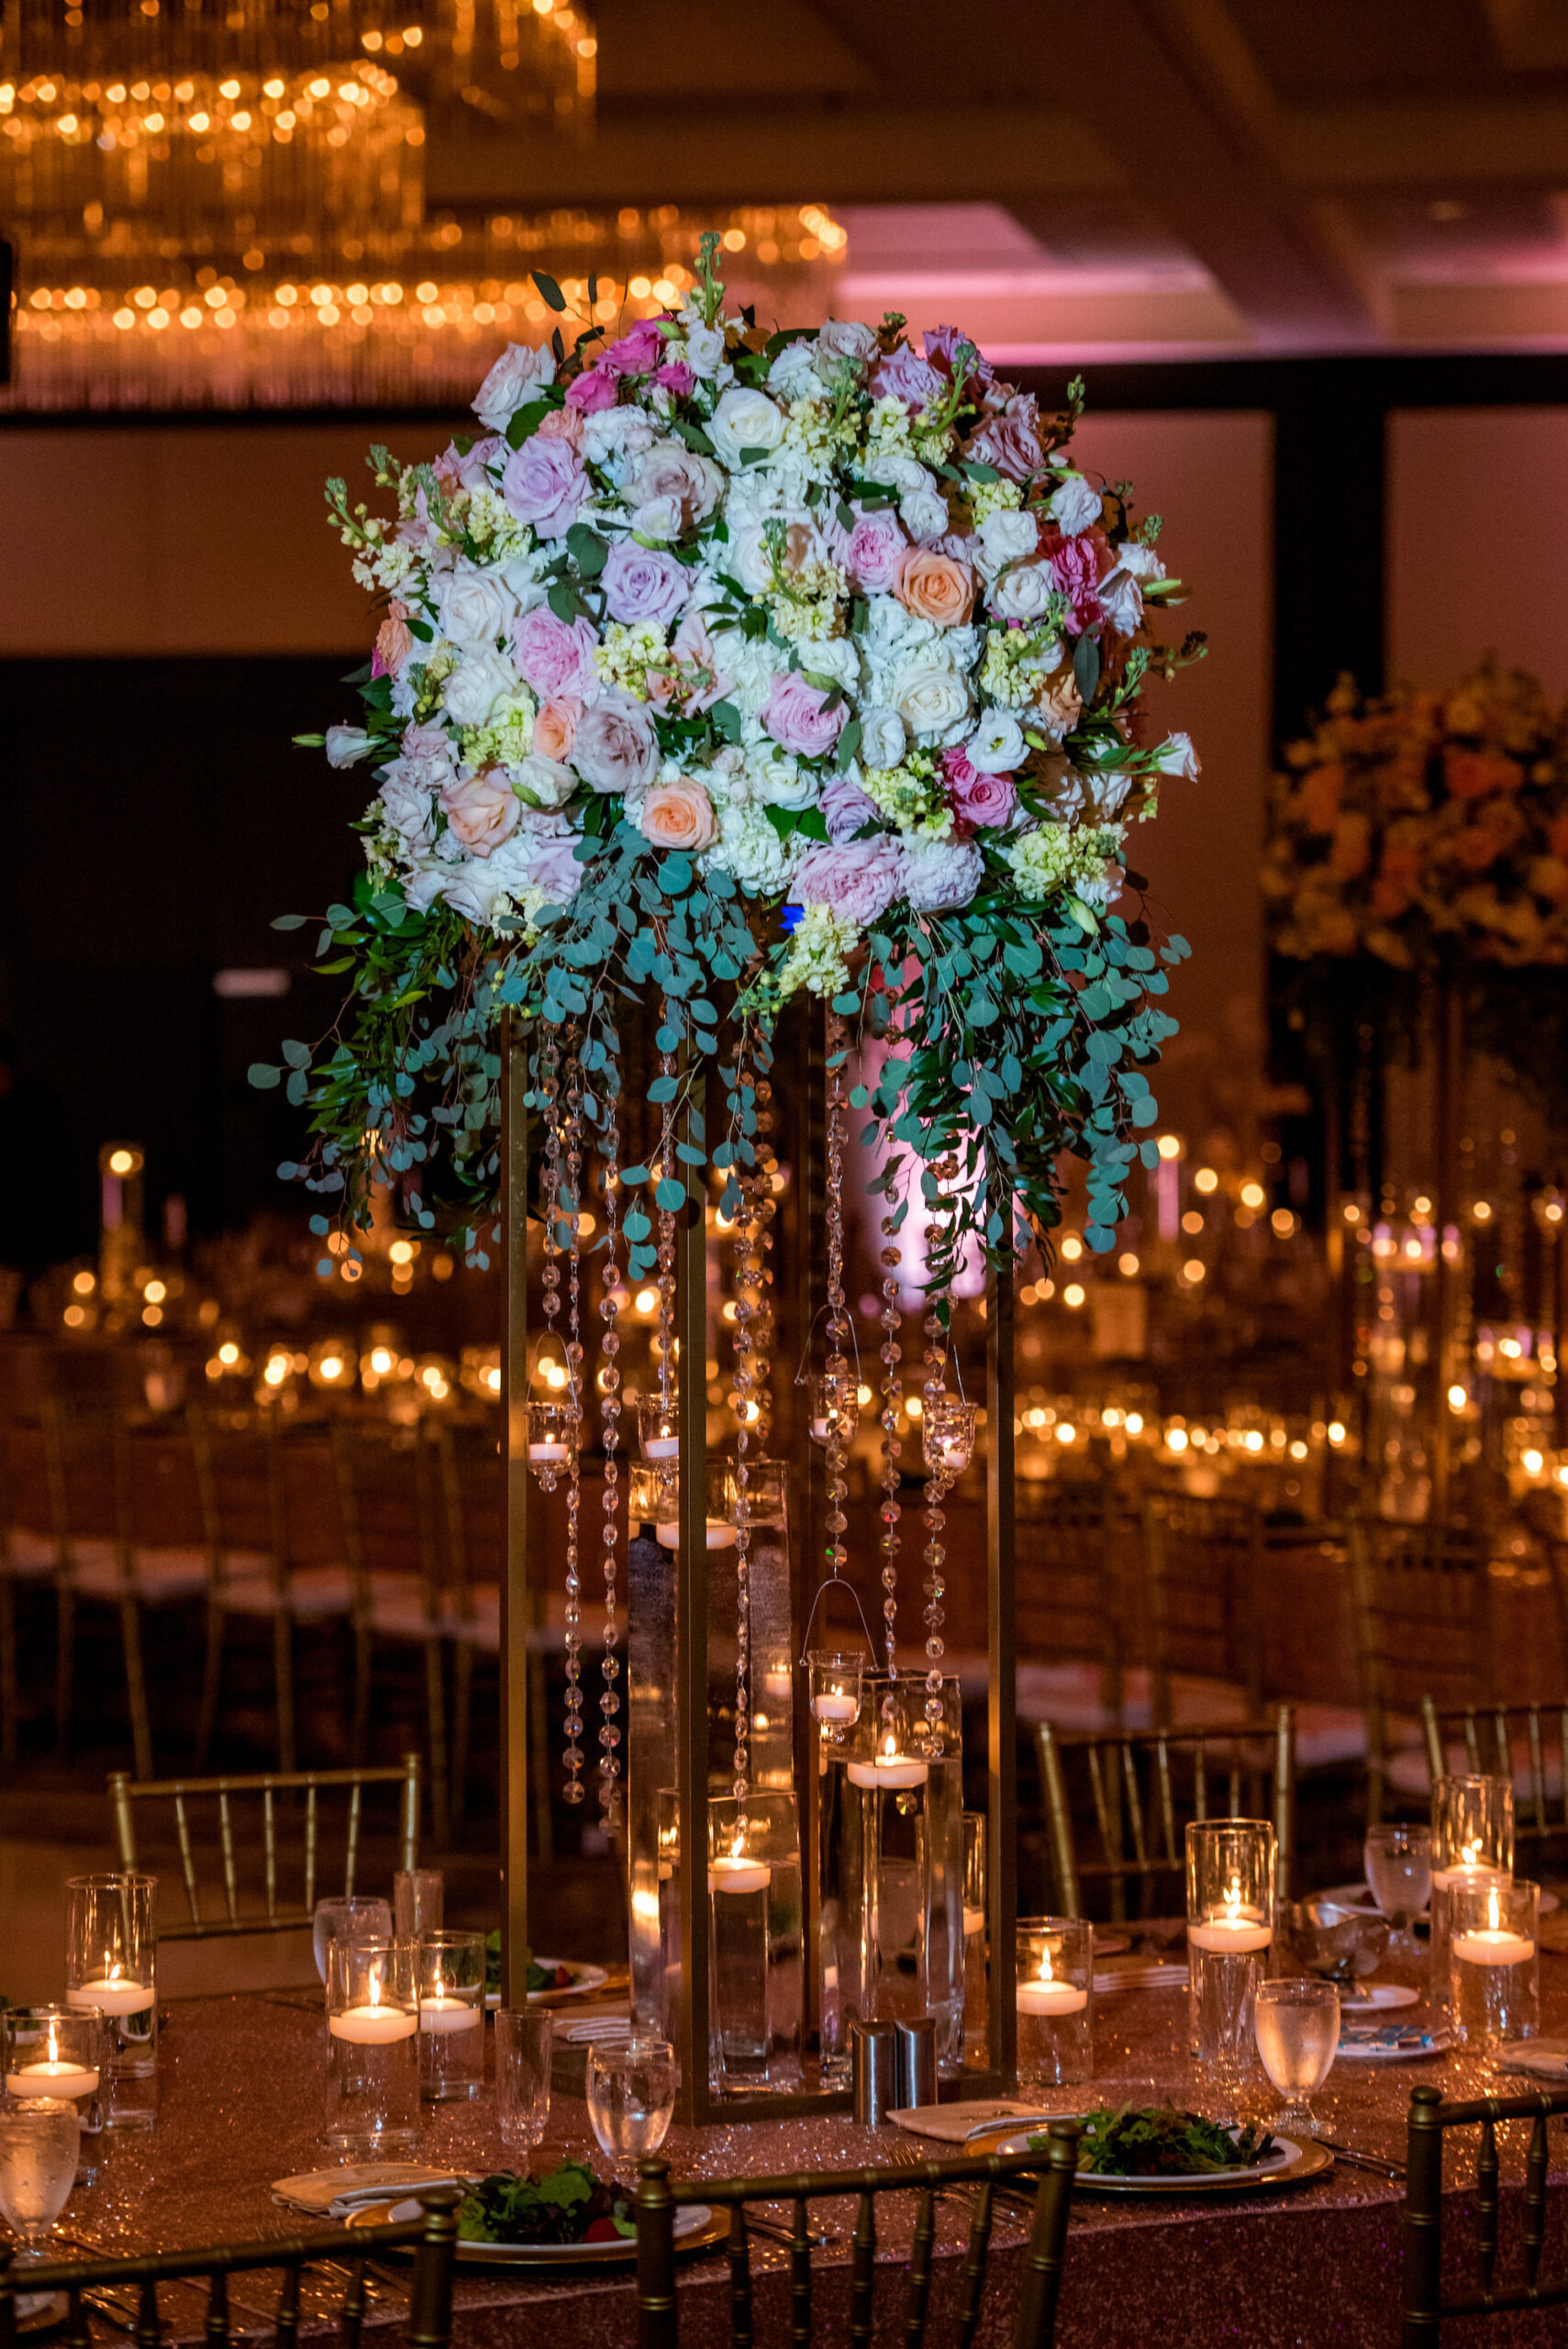 Modern Luxurious Ballroom Wedding Reception Decor, Tall Floral Centerpiece, Pink Flowers, Red Roses, White Florals, Ivory Stems, Tall Geometric Stand with Crystals, Sequined Table Linens